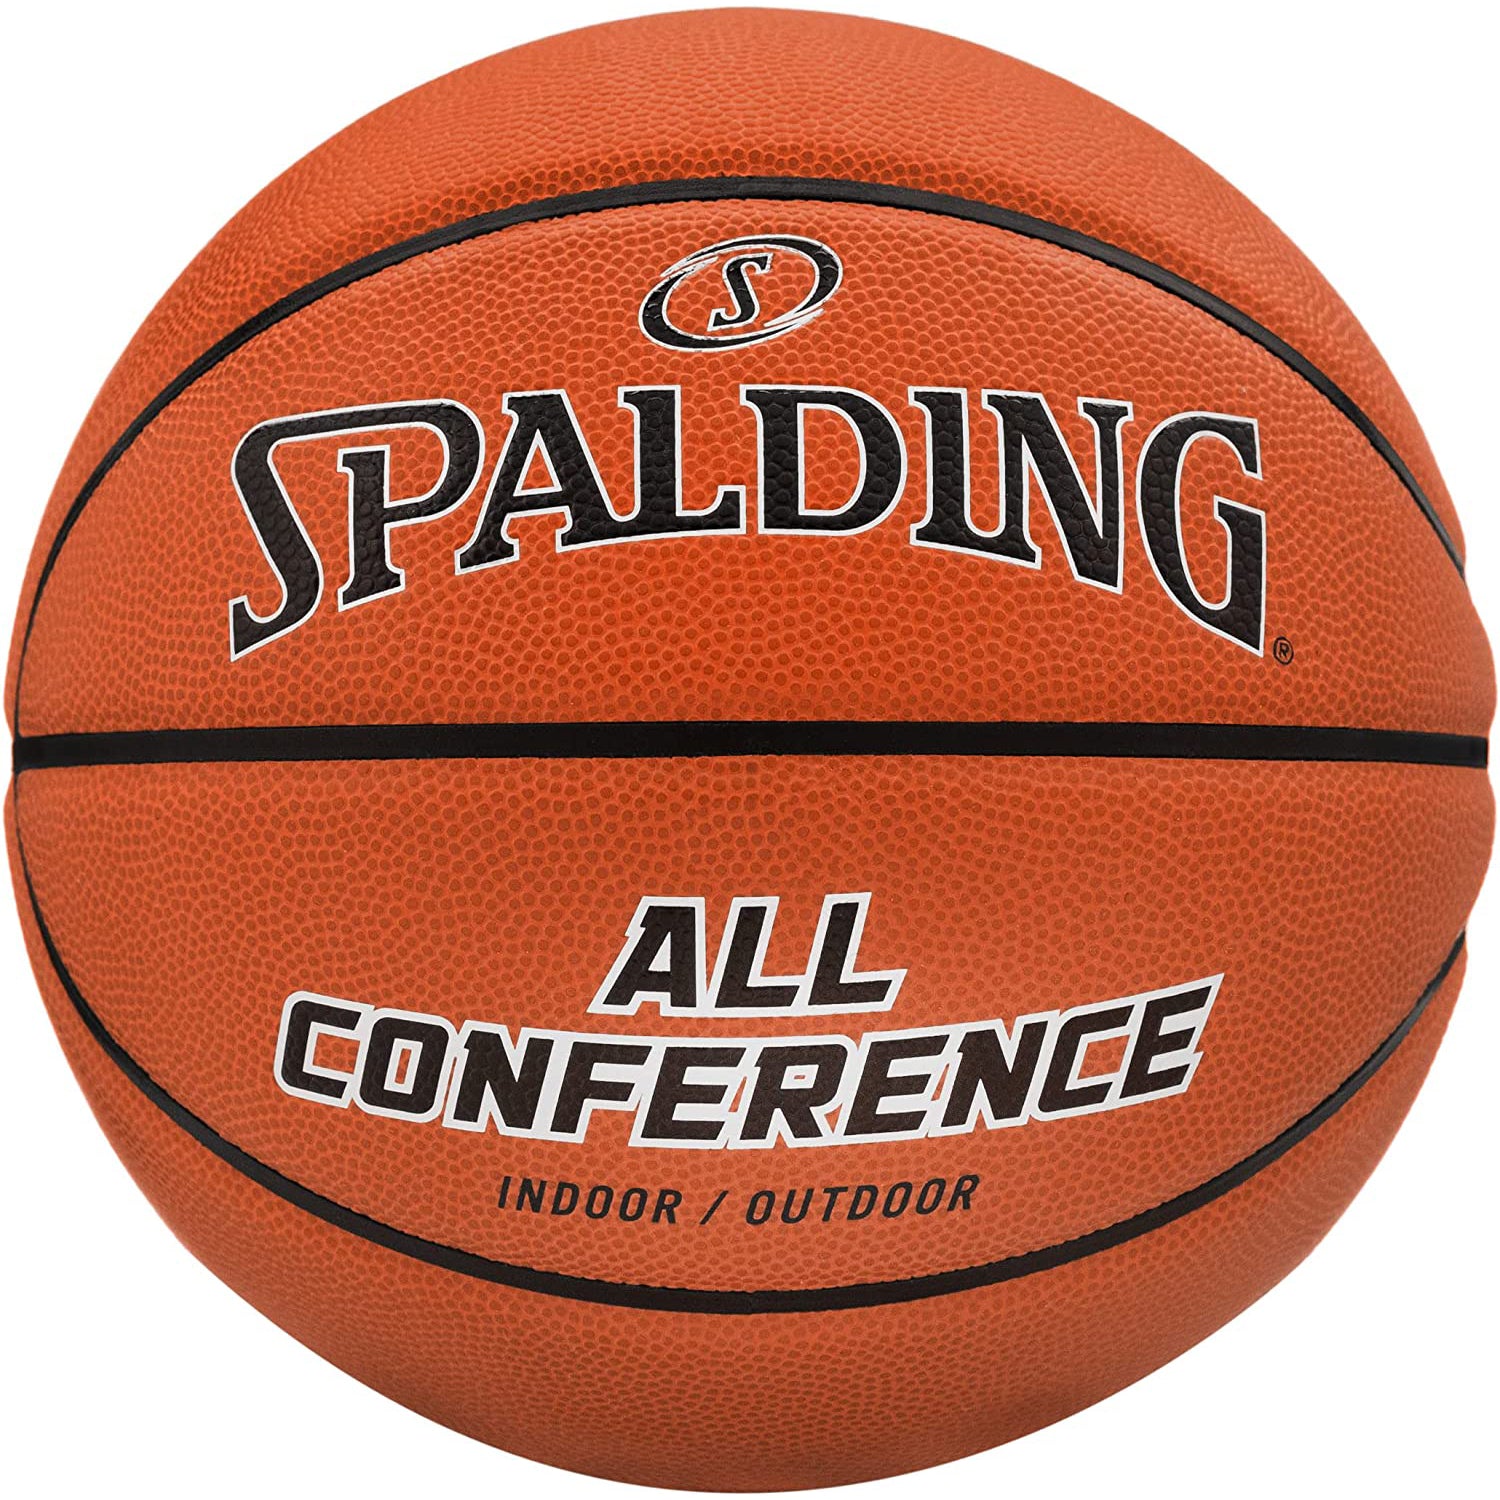 Spalding All Conference Indoor/Outdoor Basketball Spalding